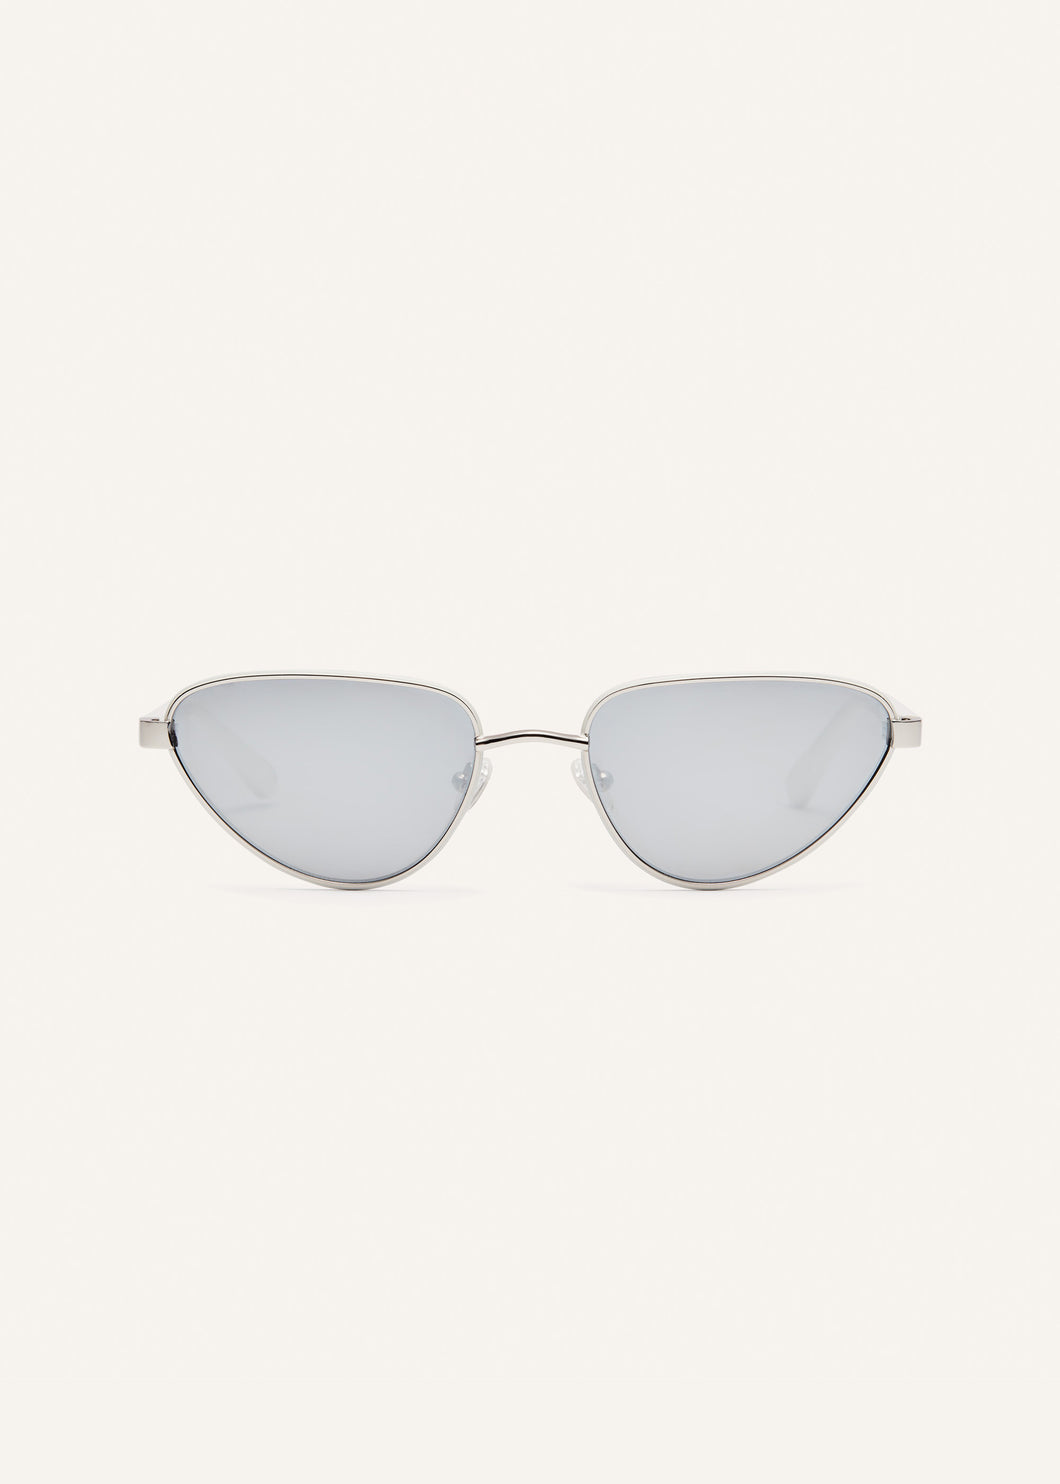 What you look for' triangle sunglasses in silver